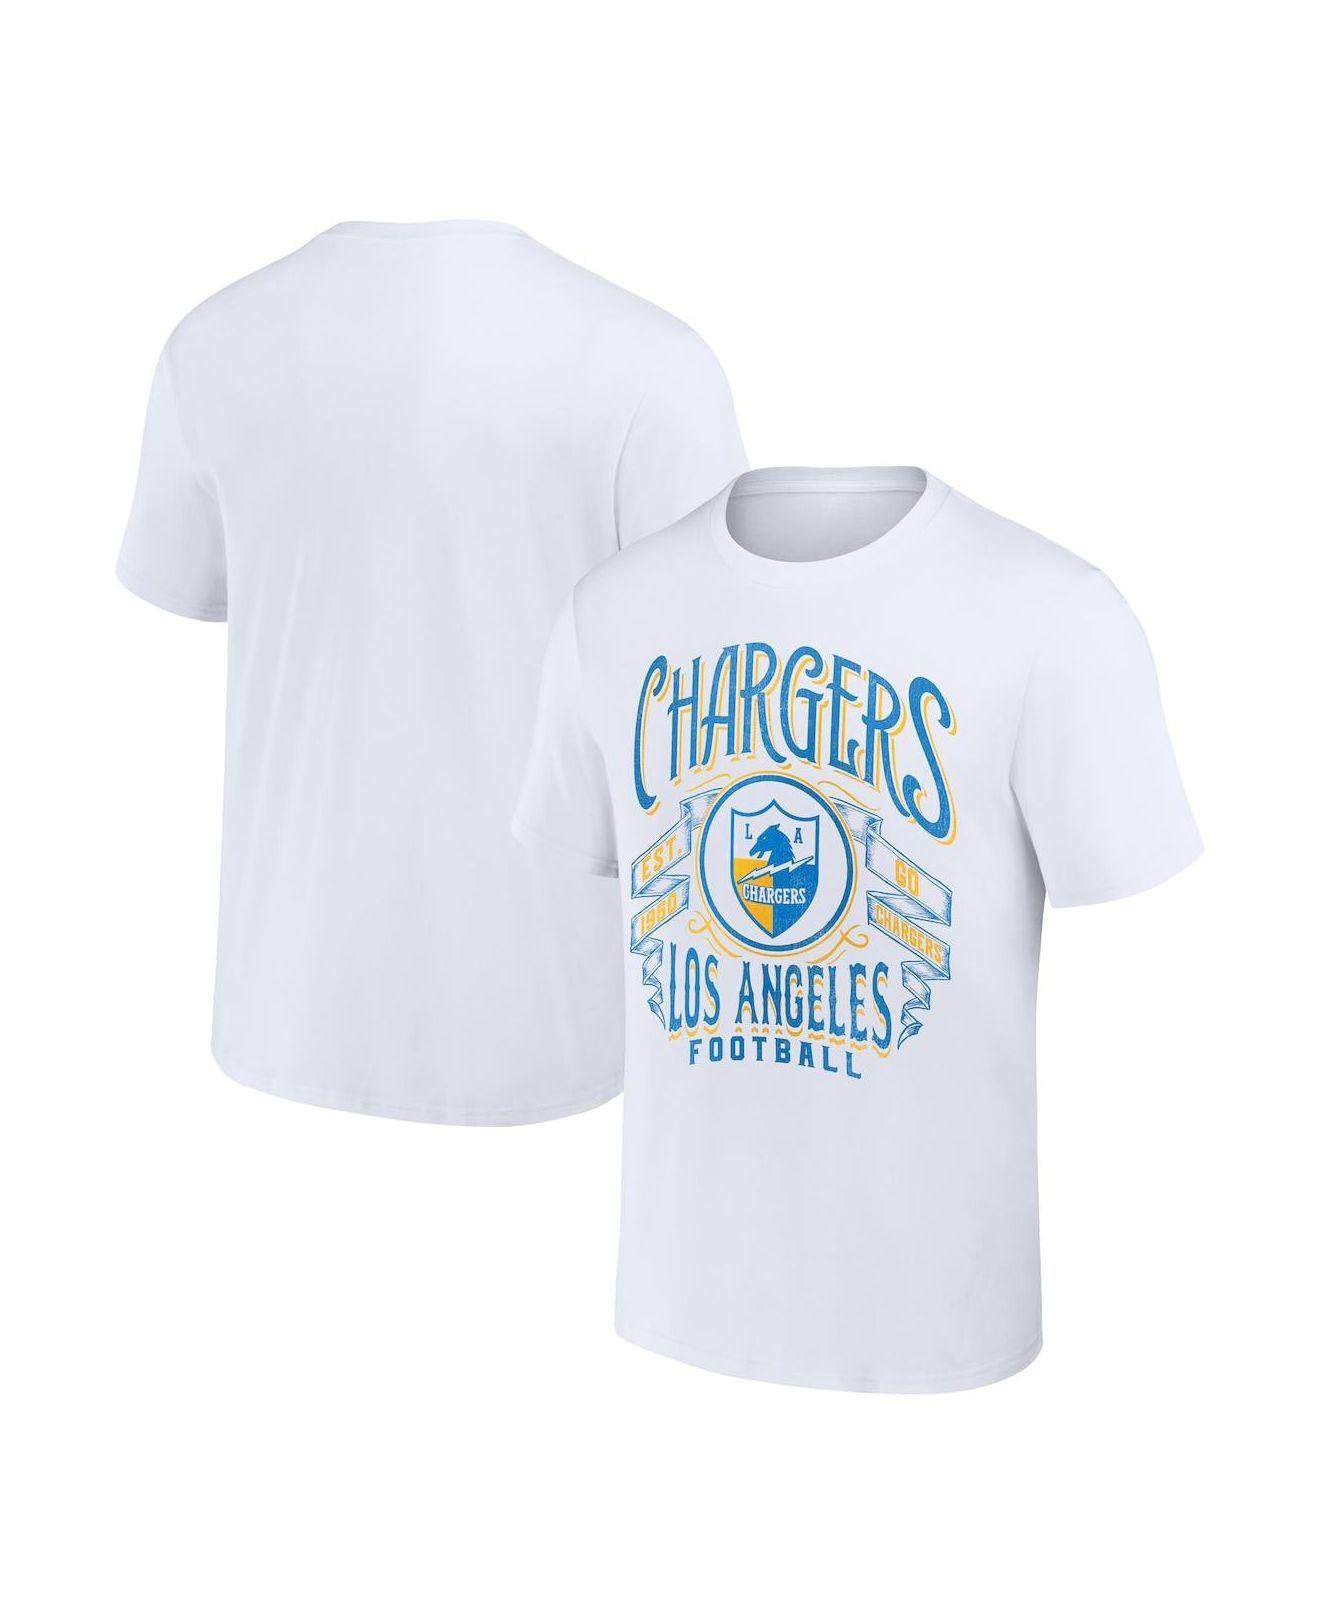 Fanatics Nfl X Darius Rucker Collection By White Los Angeles Chargers  Vintage-like Football T-shirt for Men